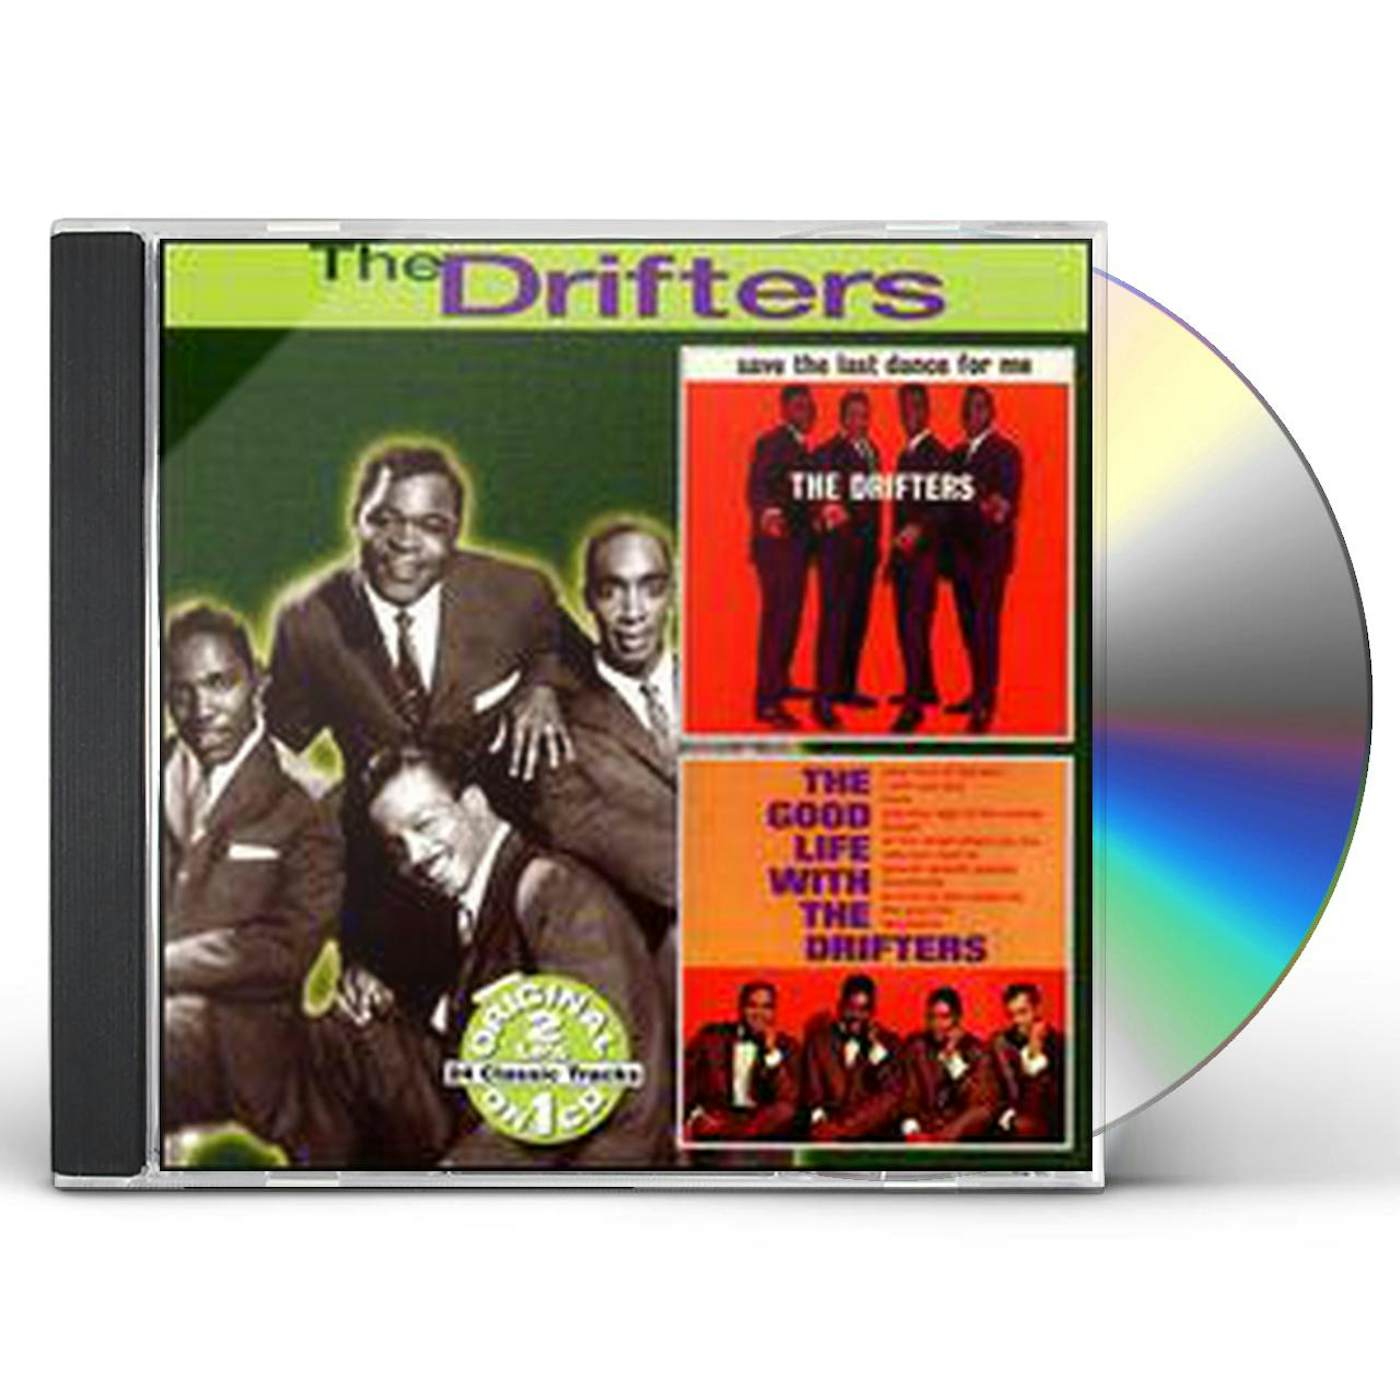 The Drifters SAVE THE LAST DANCE FOR ME: GOOD LIFE WITH DRIFTER CD